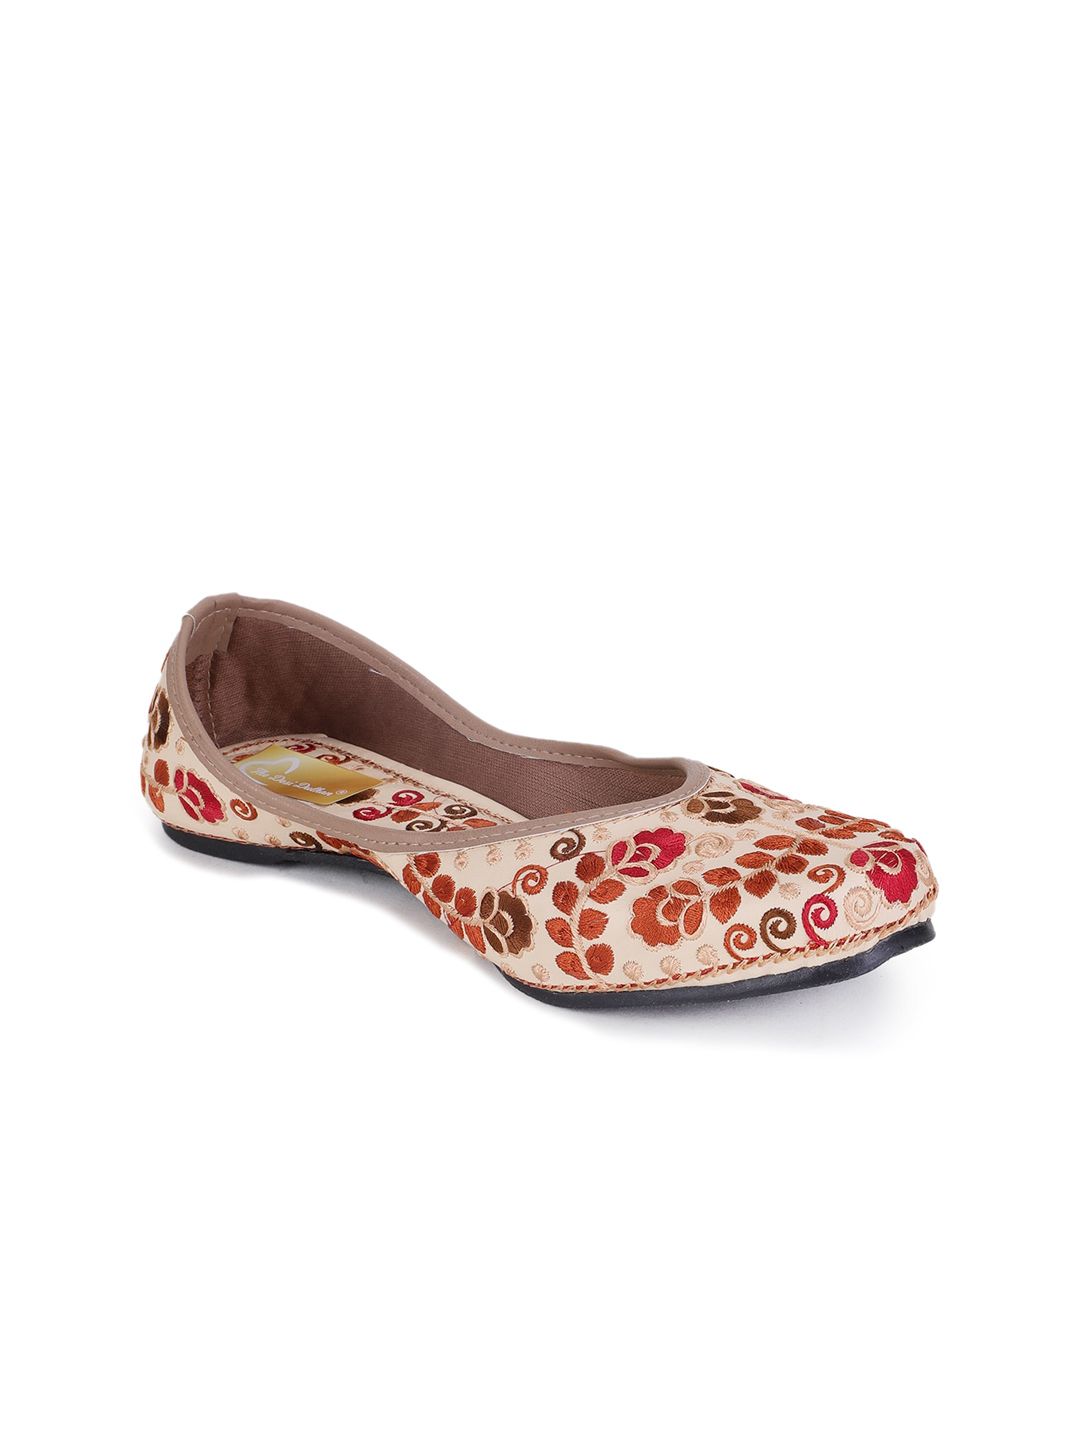 The Desi Dulhan Women Cream-Coloured Embellished Leather Ethnic Embroidered Flats Price in India